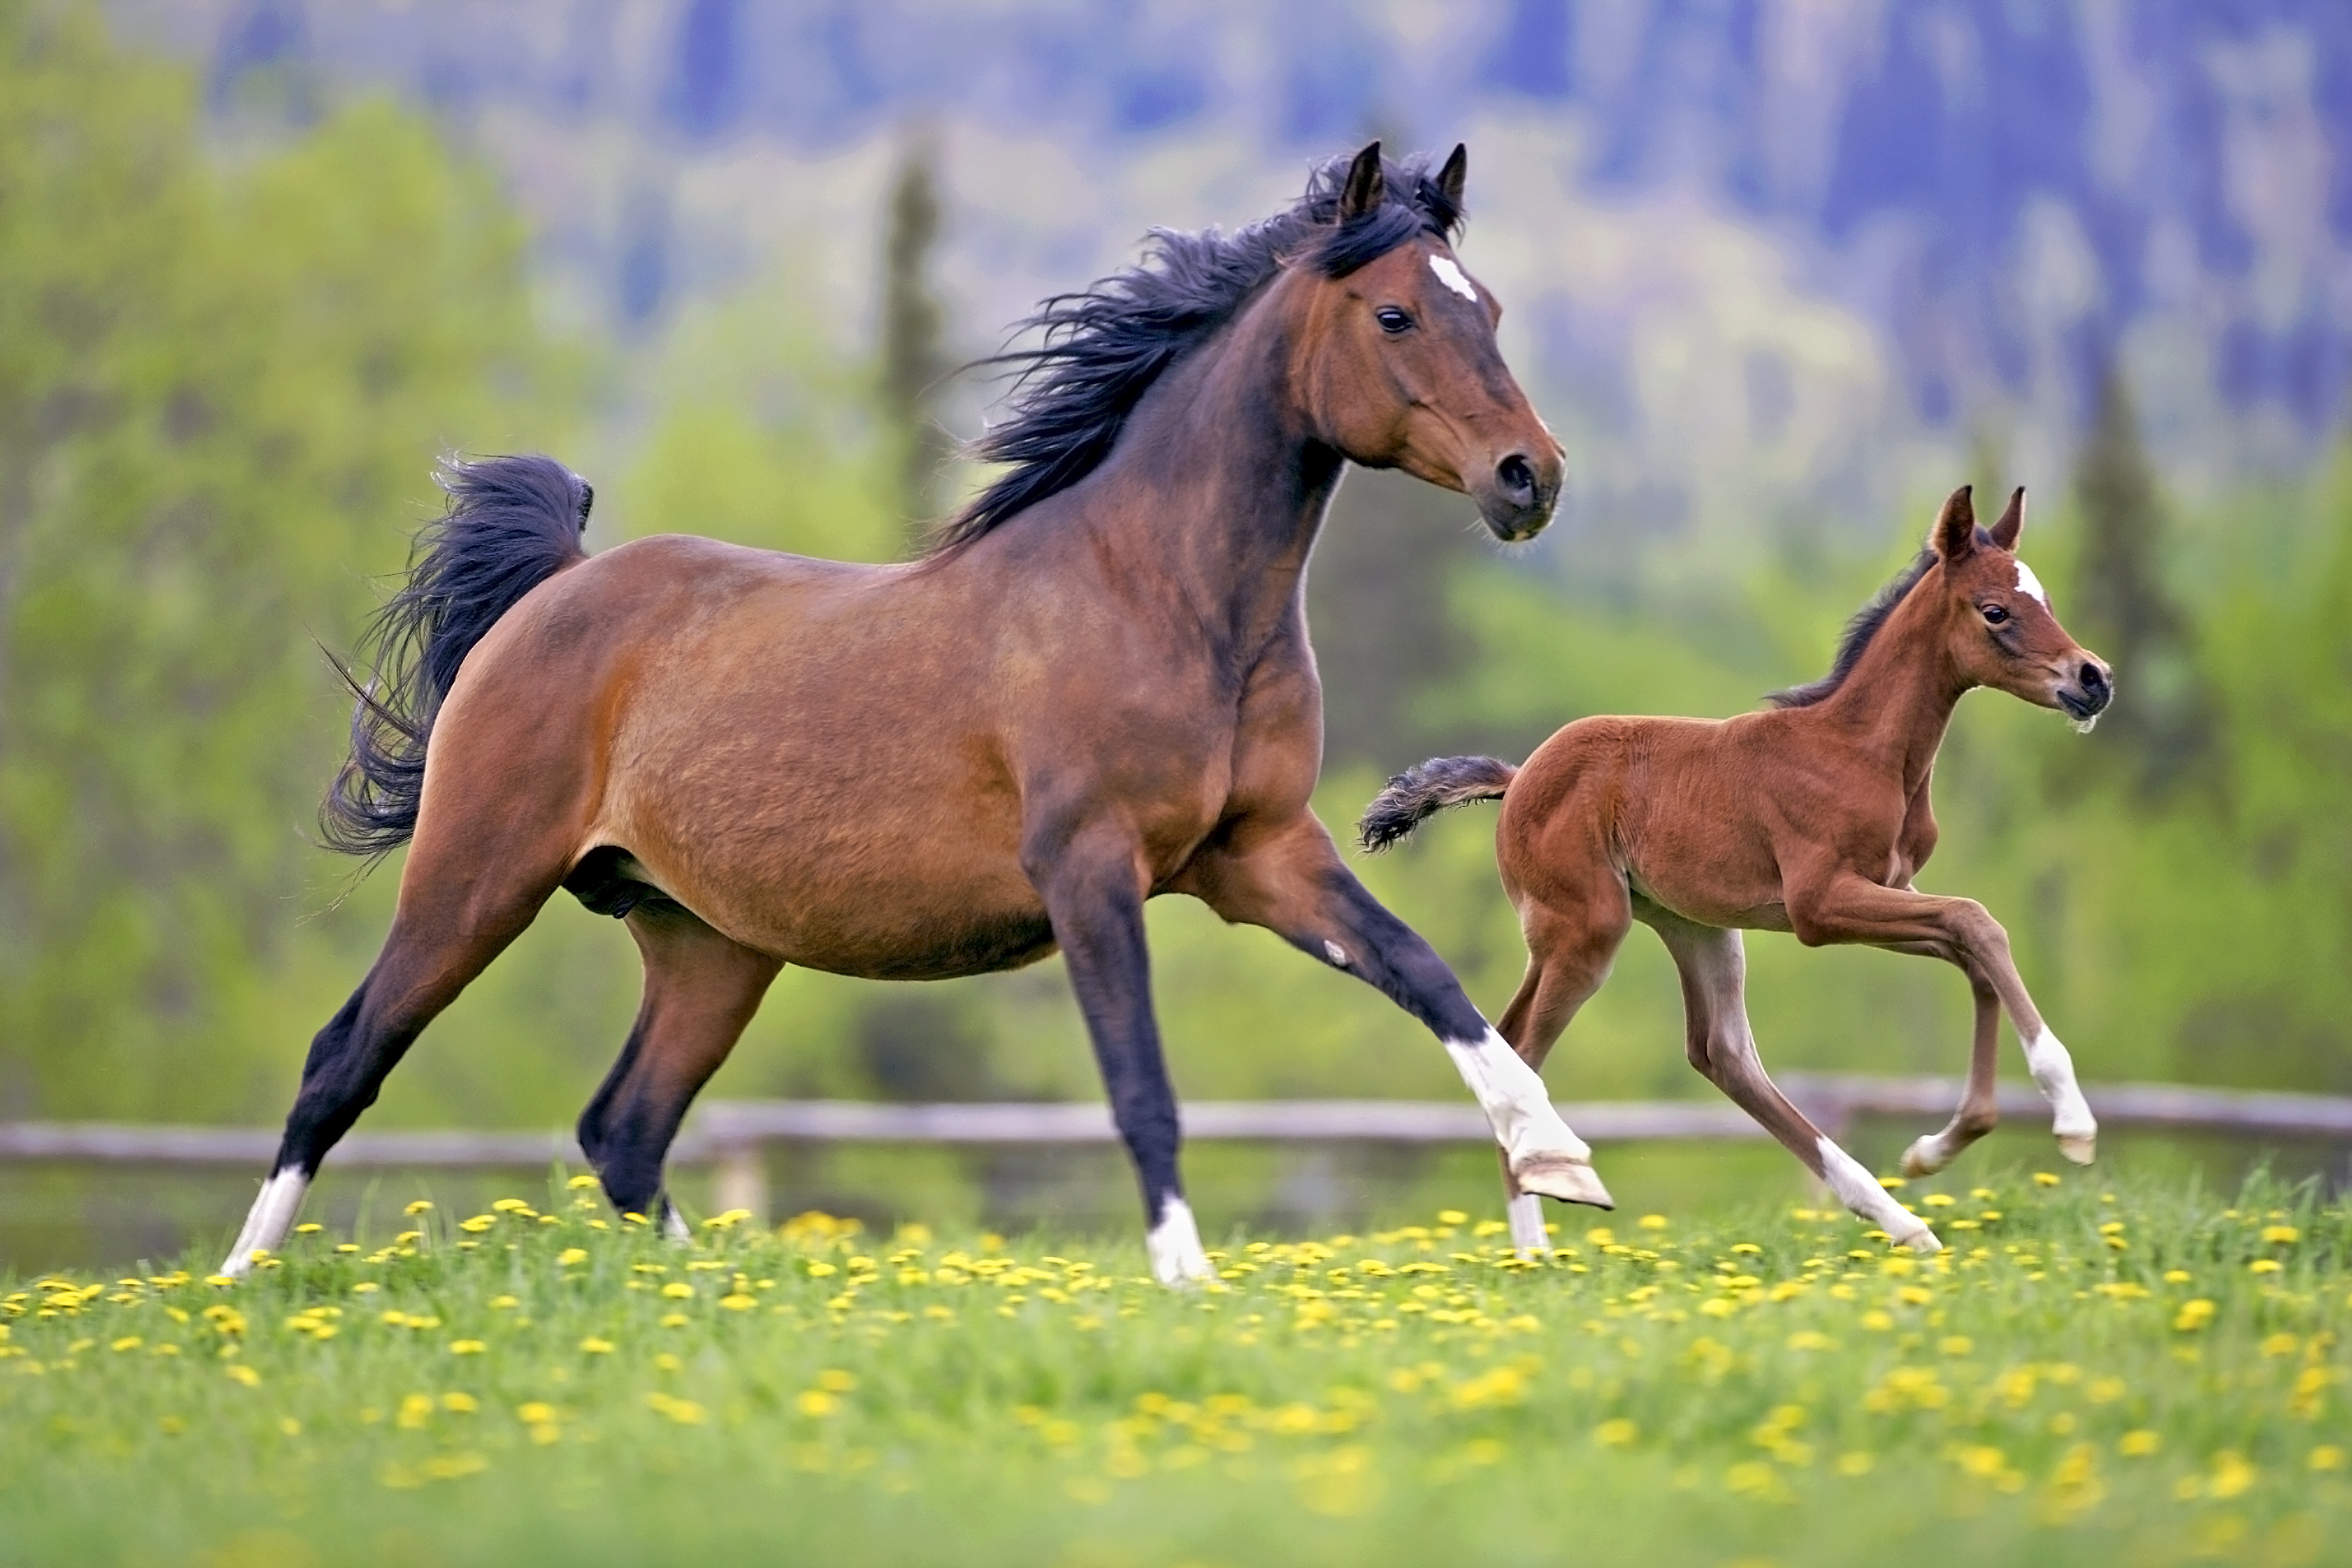 A mare running with a foal